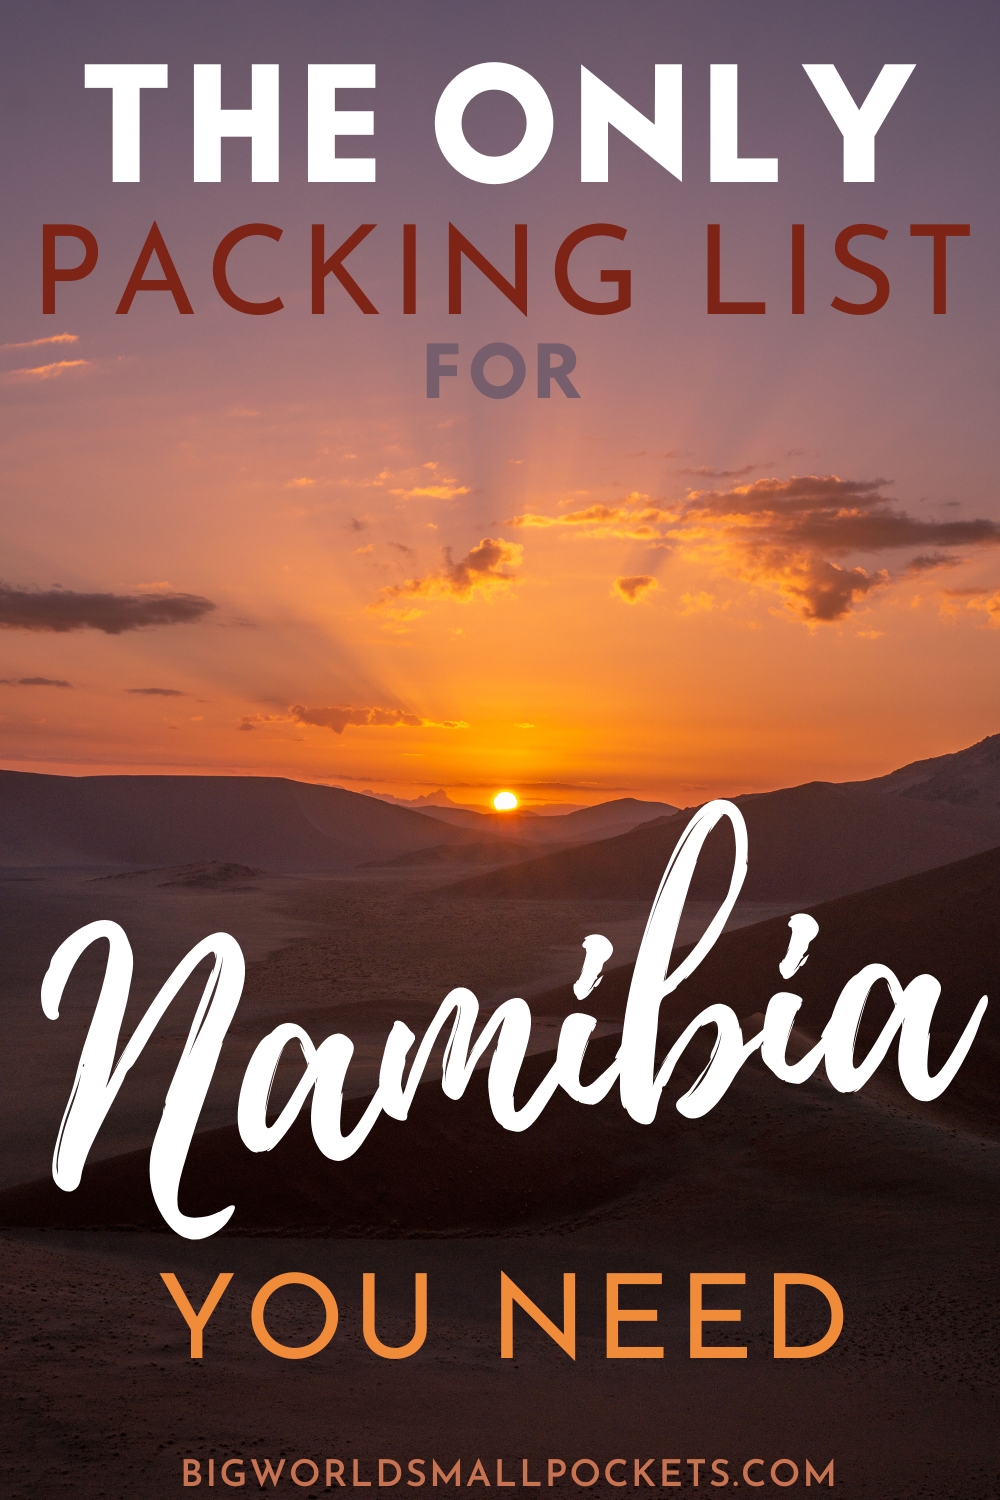 Only Packing List for Namibia You Need!